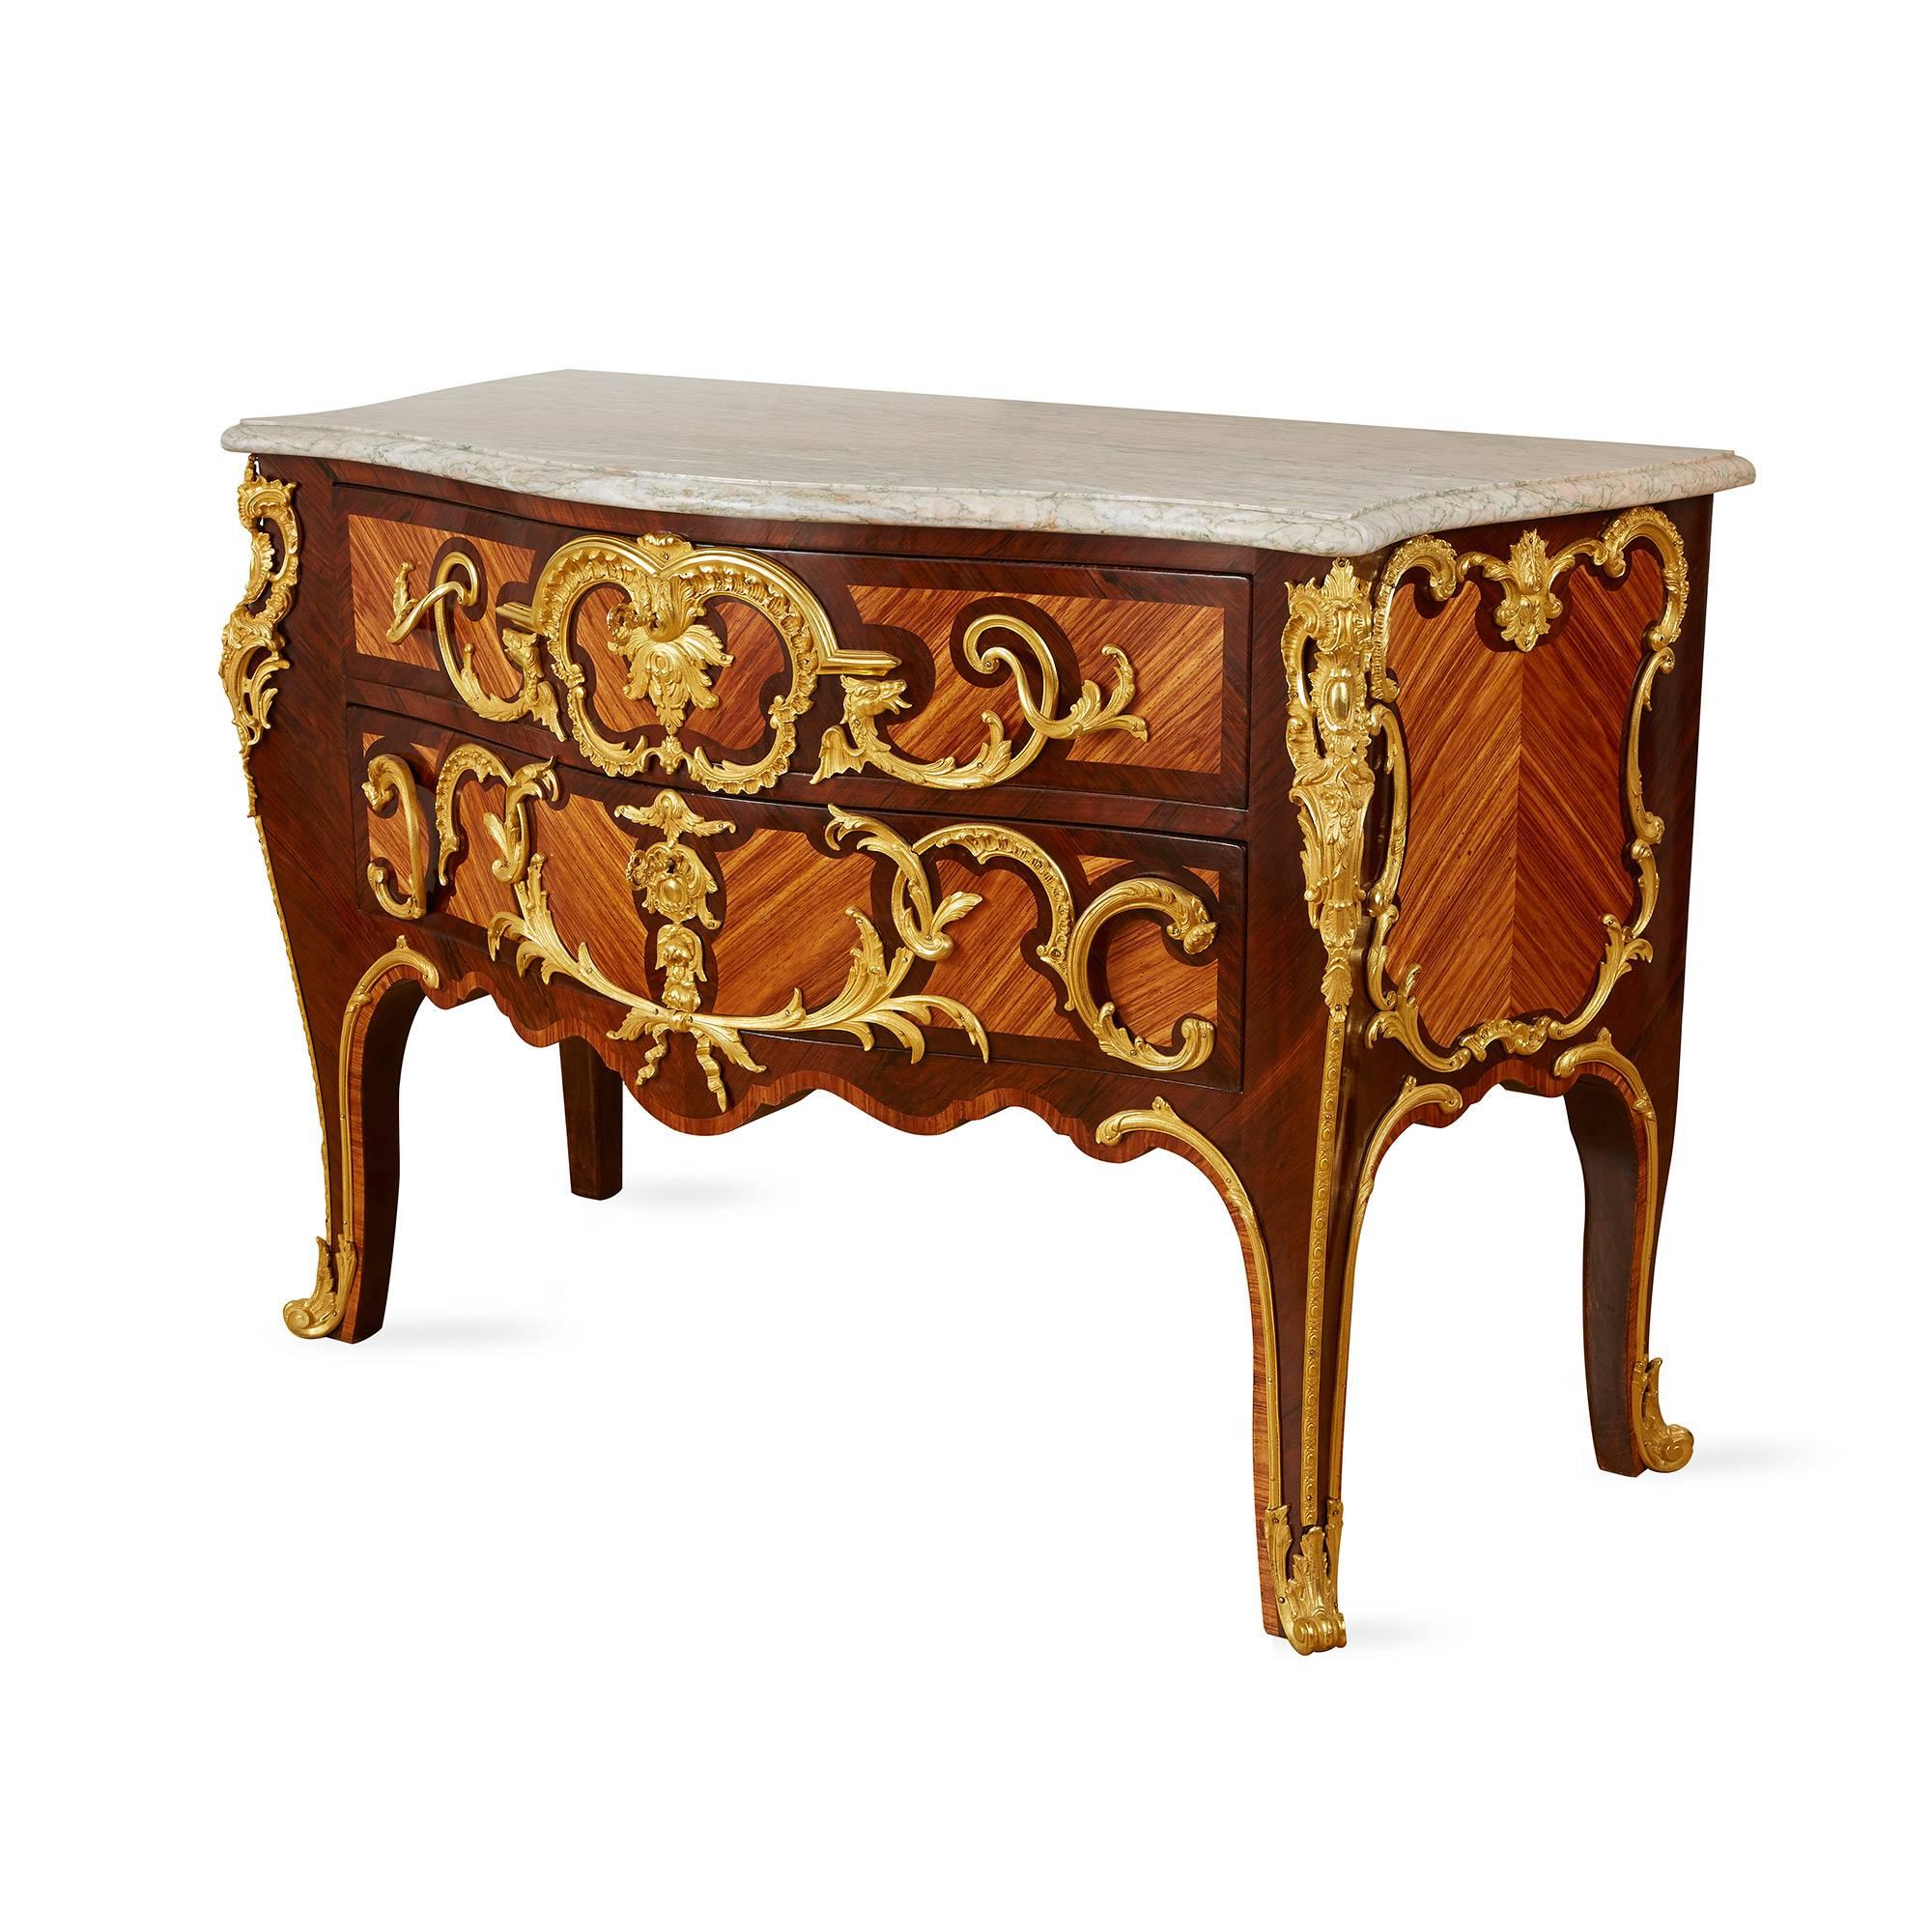 The parquetry inlaid with cartouches and a decorative frieze, the convex front with two transversal drawers with ormolu mounts and scrolled sabots.

After models by Charles Cressent (French, 1685-1768).  Cressent was a very highly regarded French